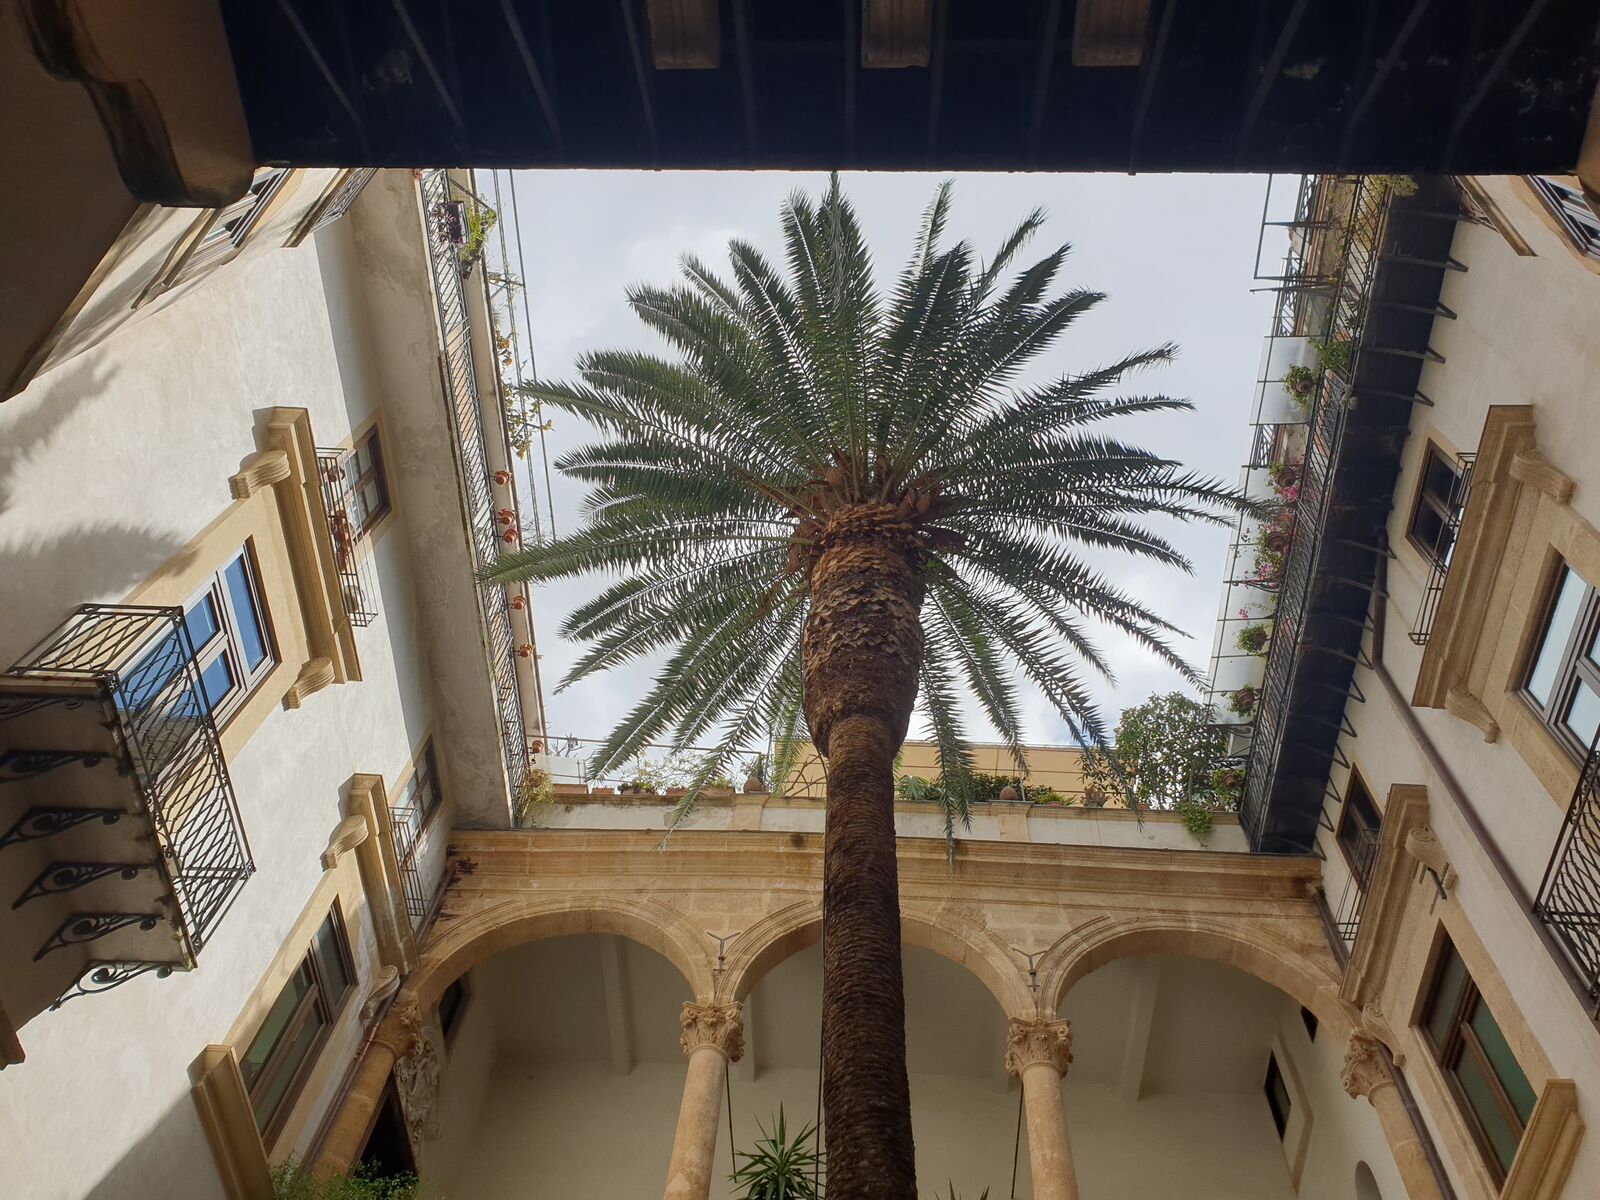 This palm tree fills the atrium perfectly.